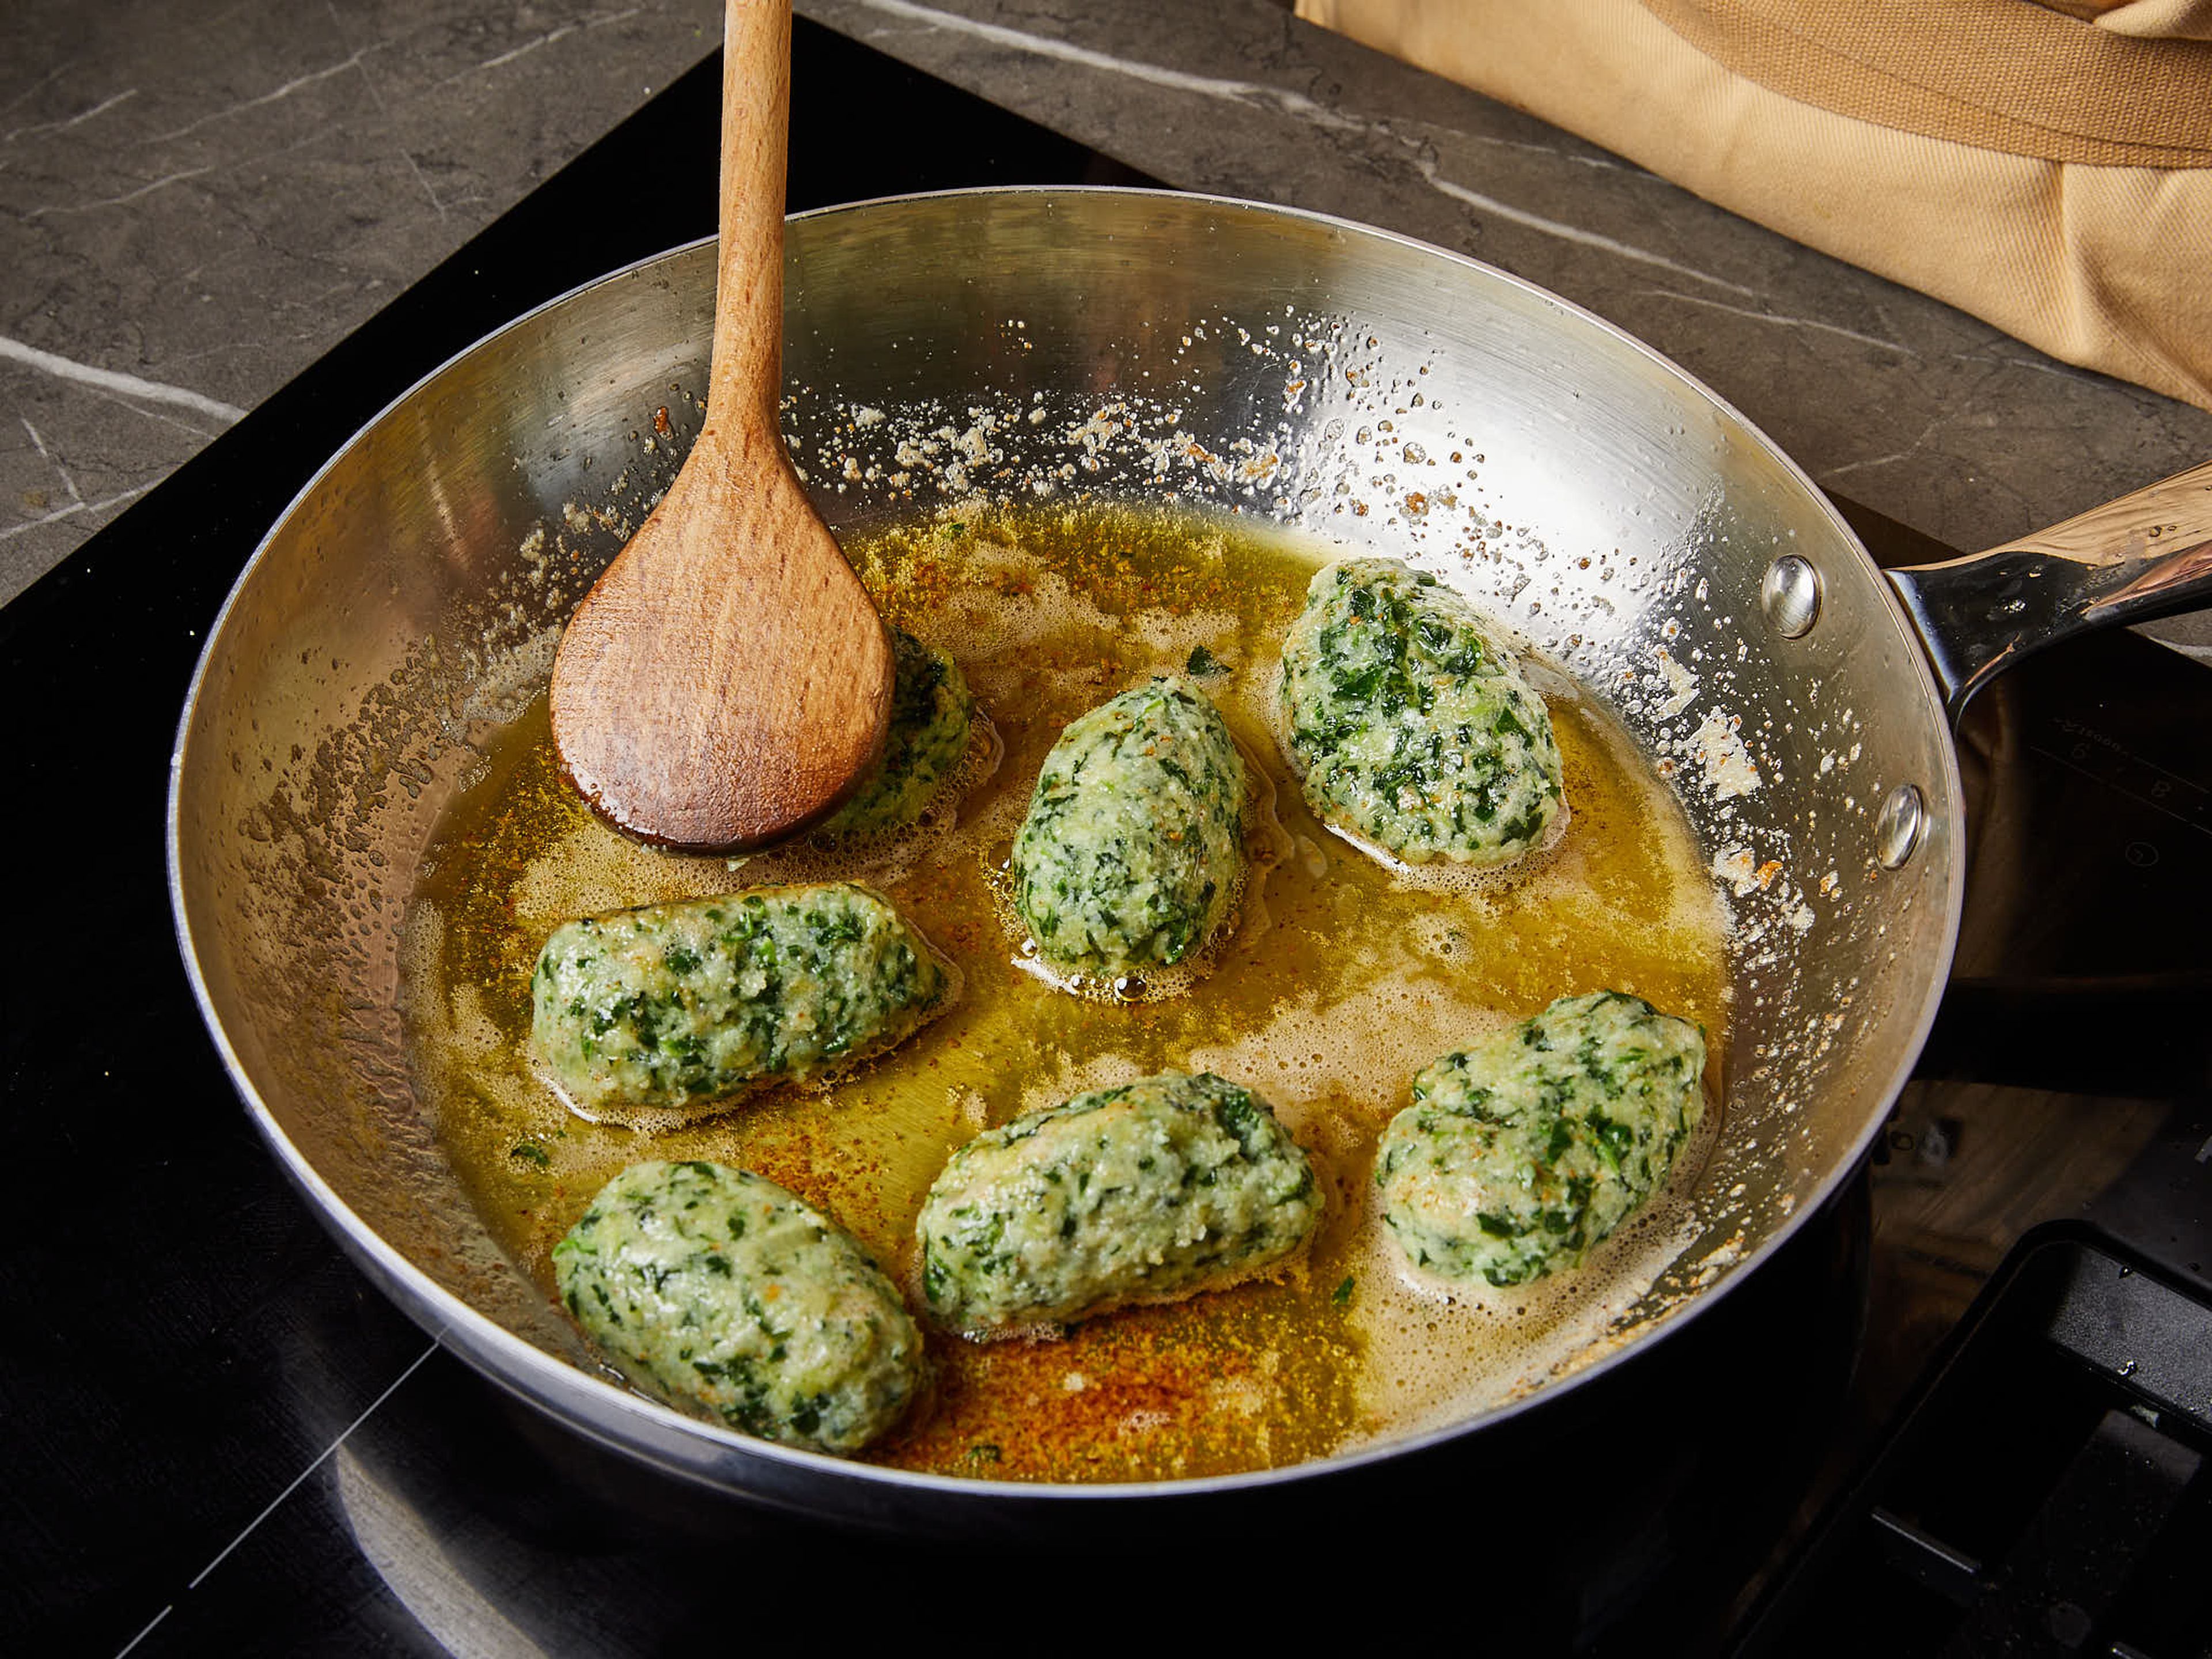 Melt the remaining butter in a pan to brown lightly. Add the malfatti an toss in the brown butter. Serve with the butter, grate the remaining Parmesan over, some lemon zest and fresh pepper.